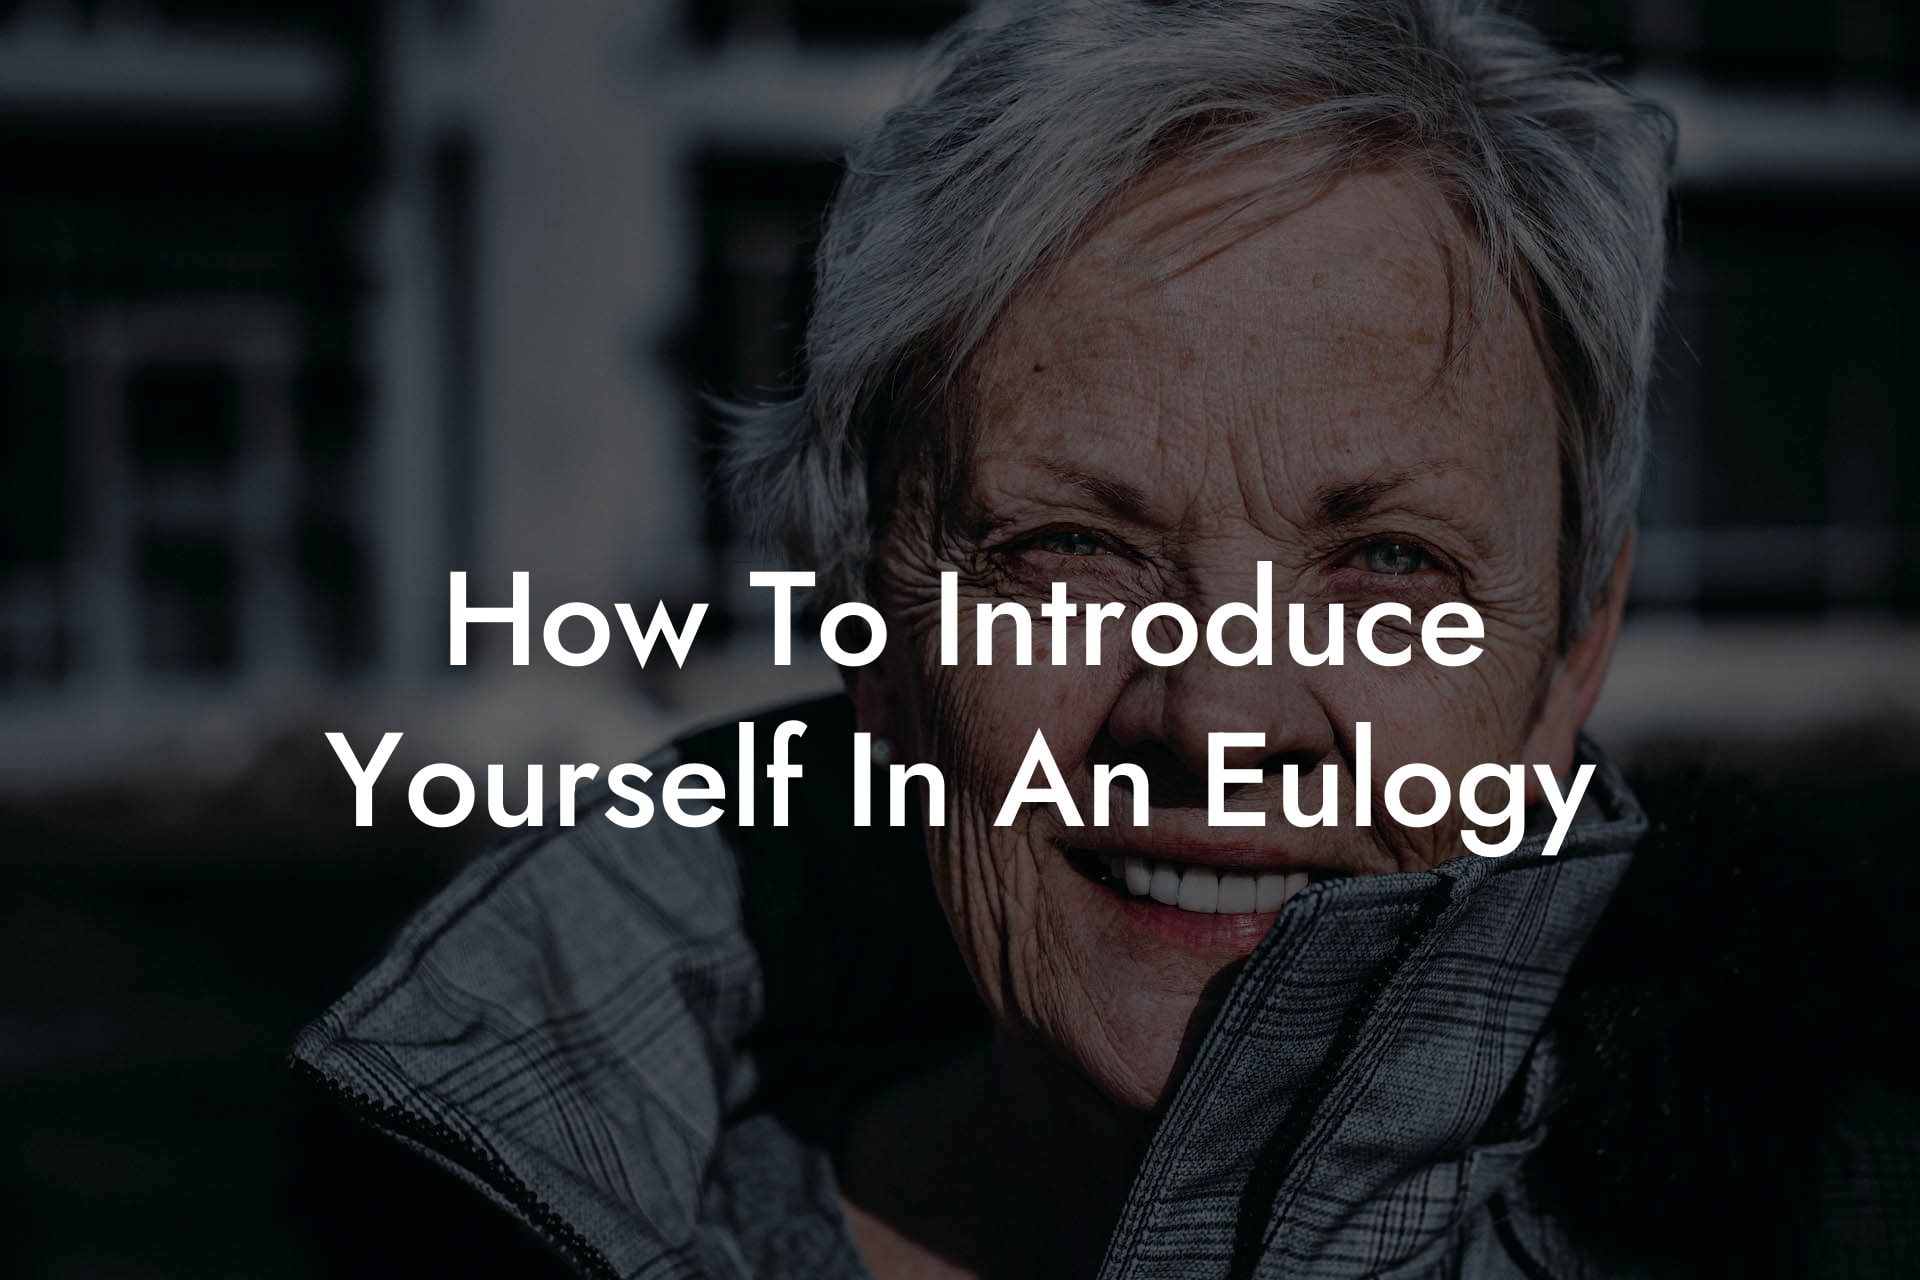 How To Introduce Yourself In An Eulogy